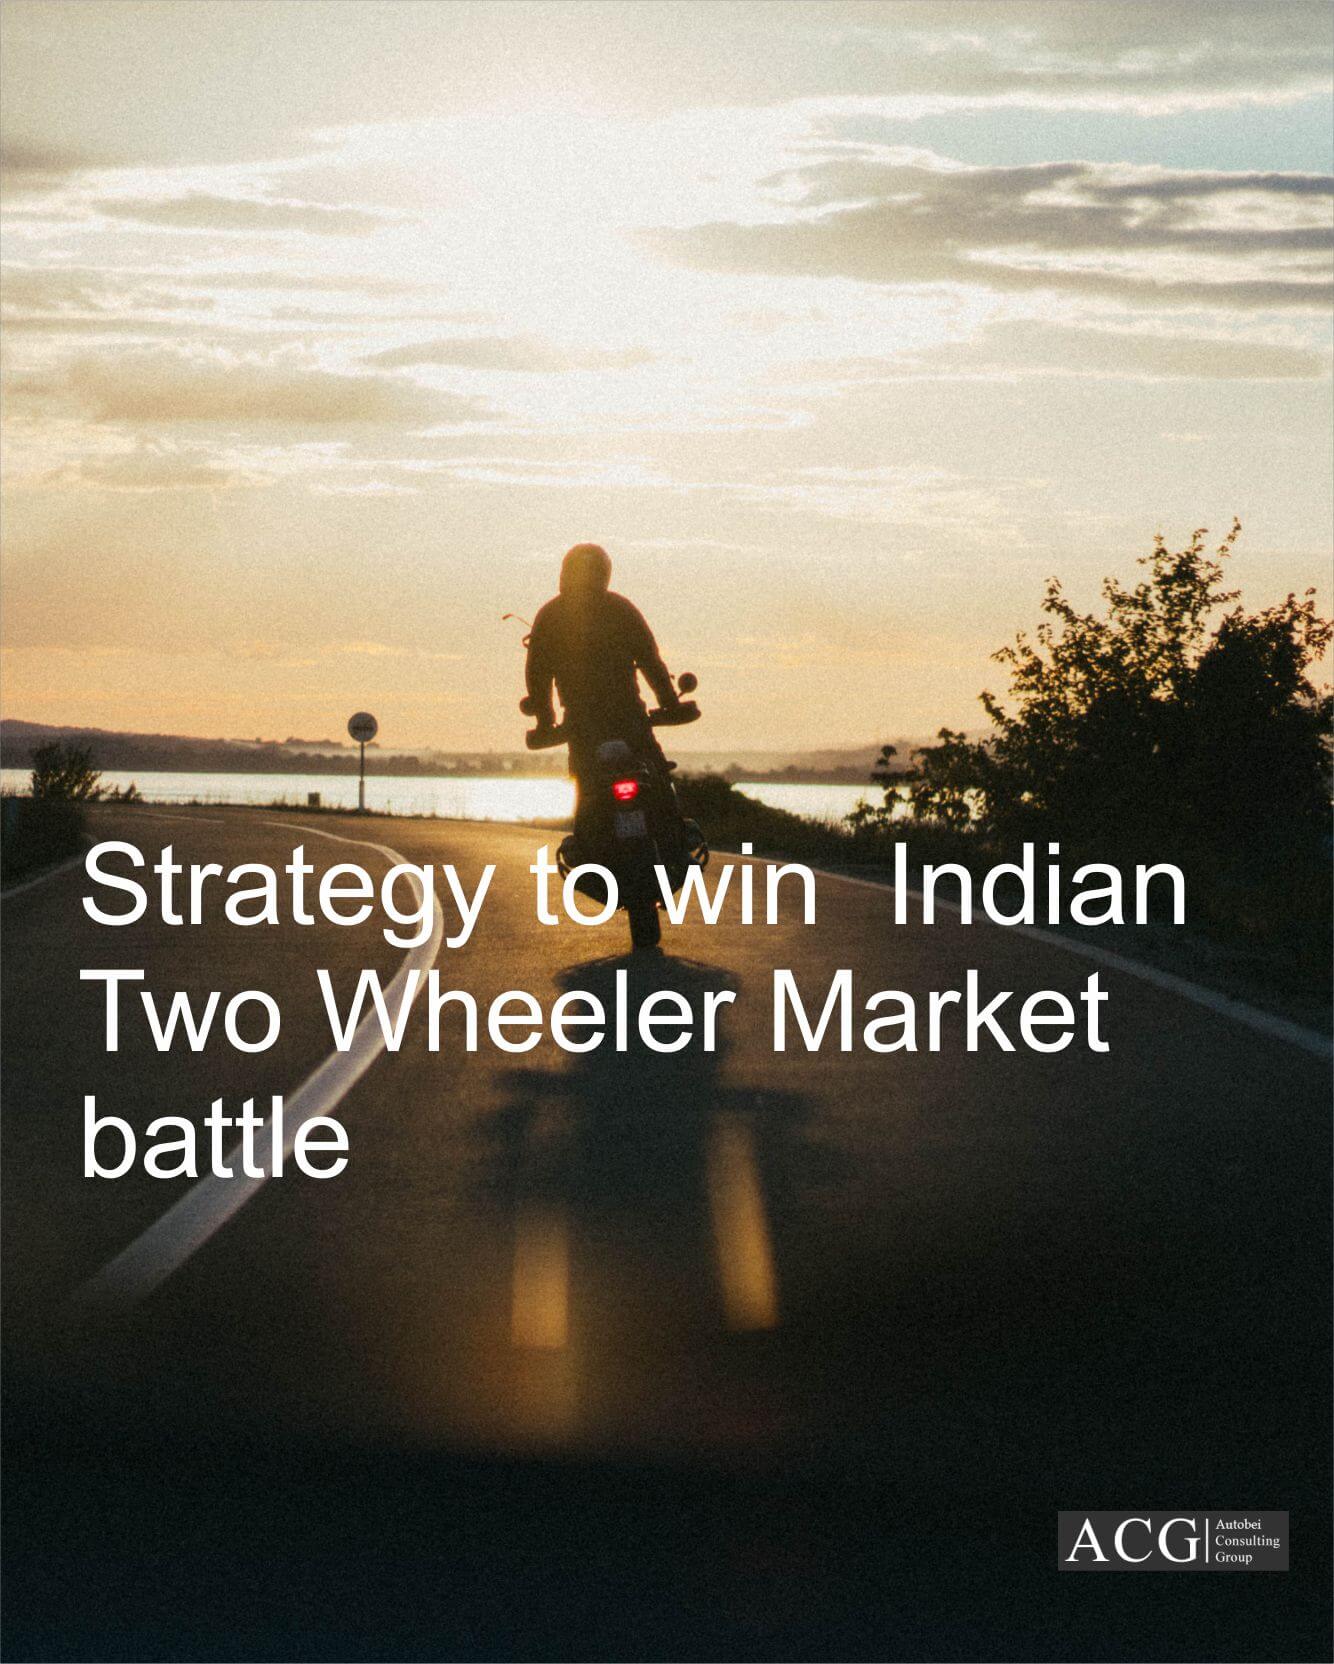 Strategy to win the Indian Two Wheeler Market battle